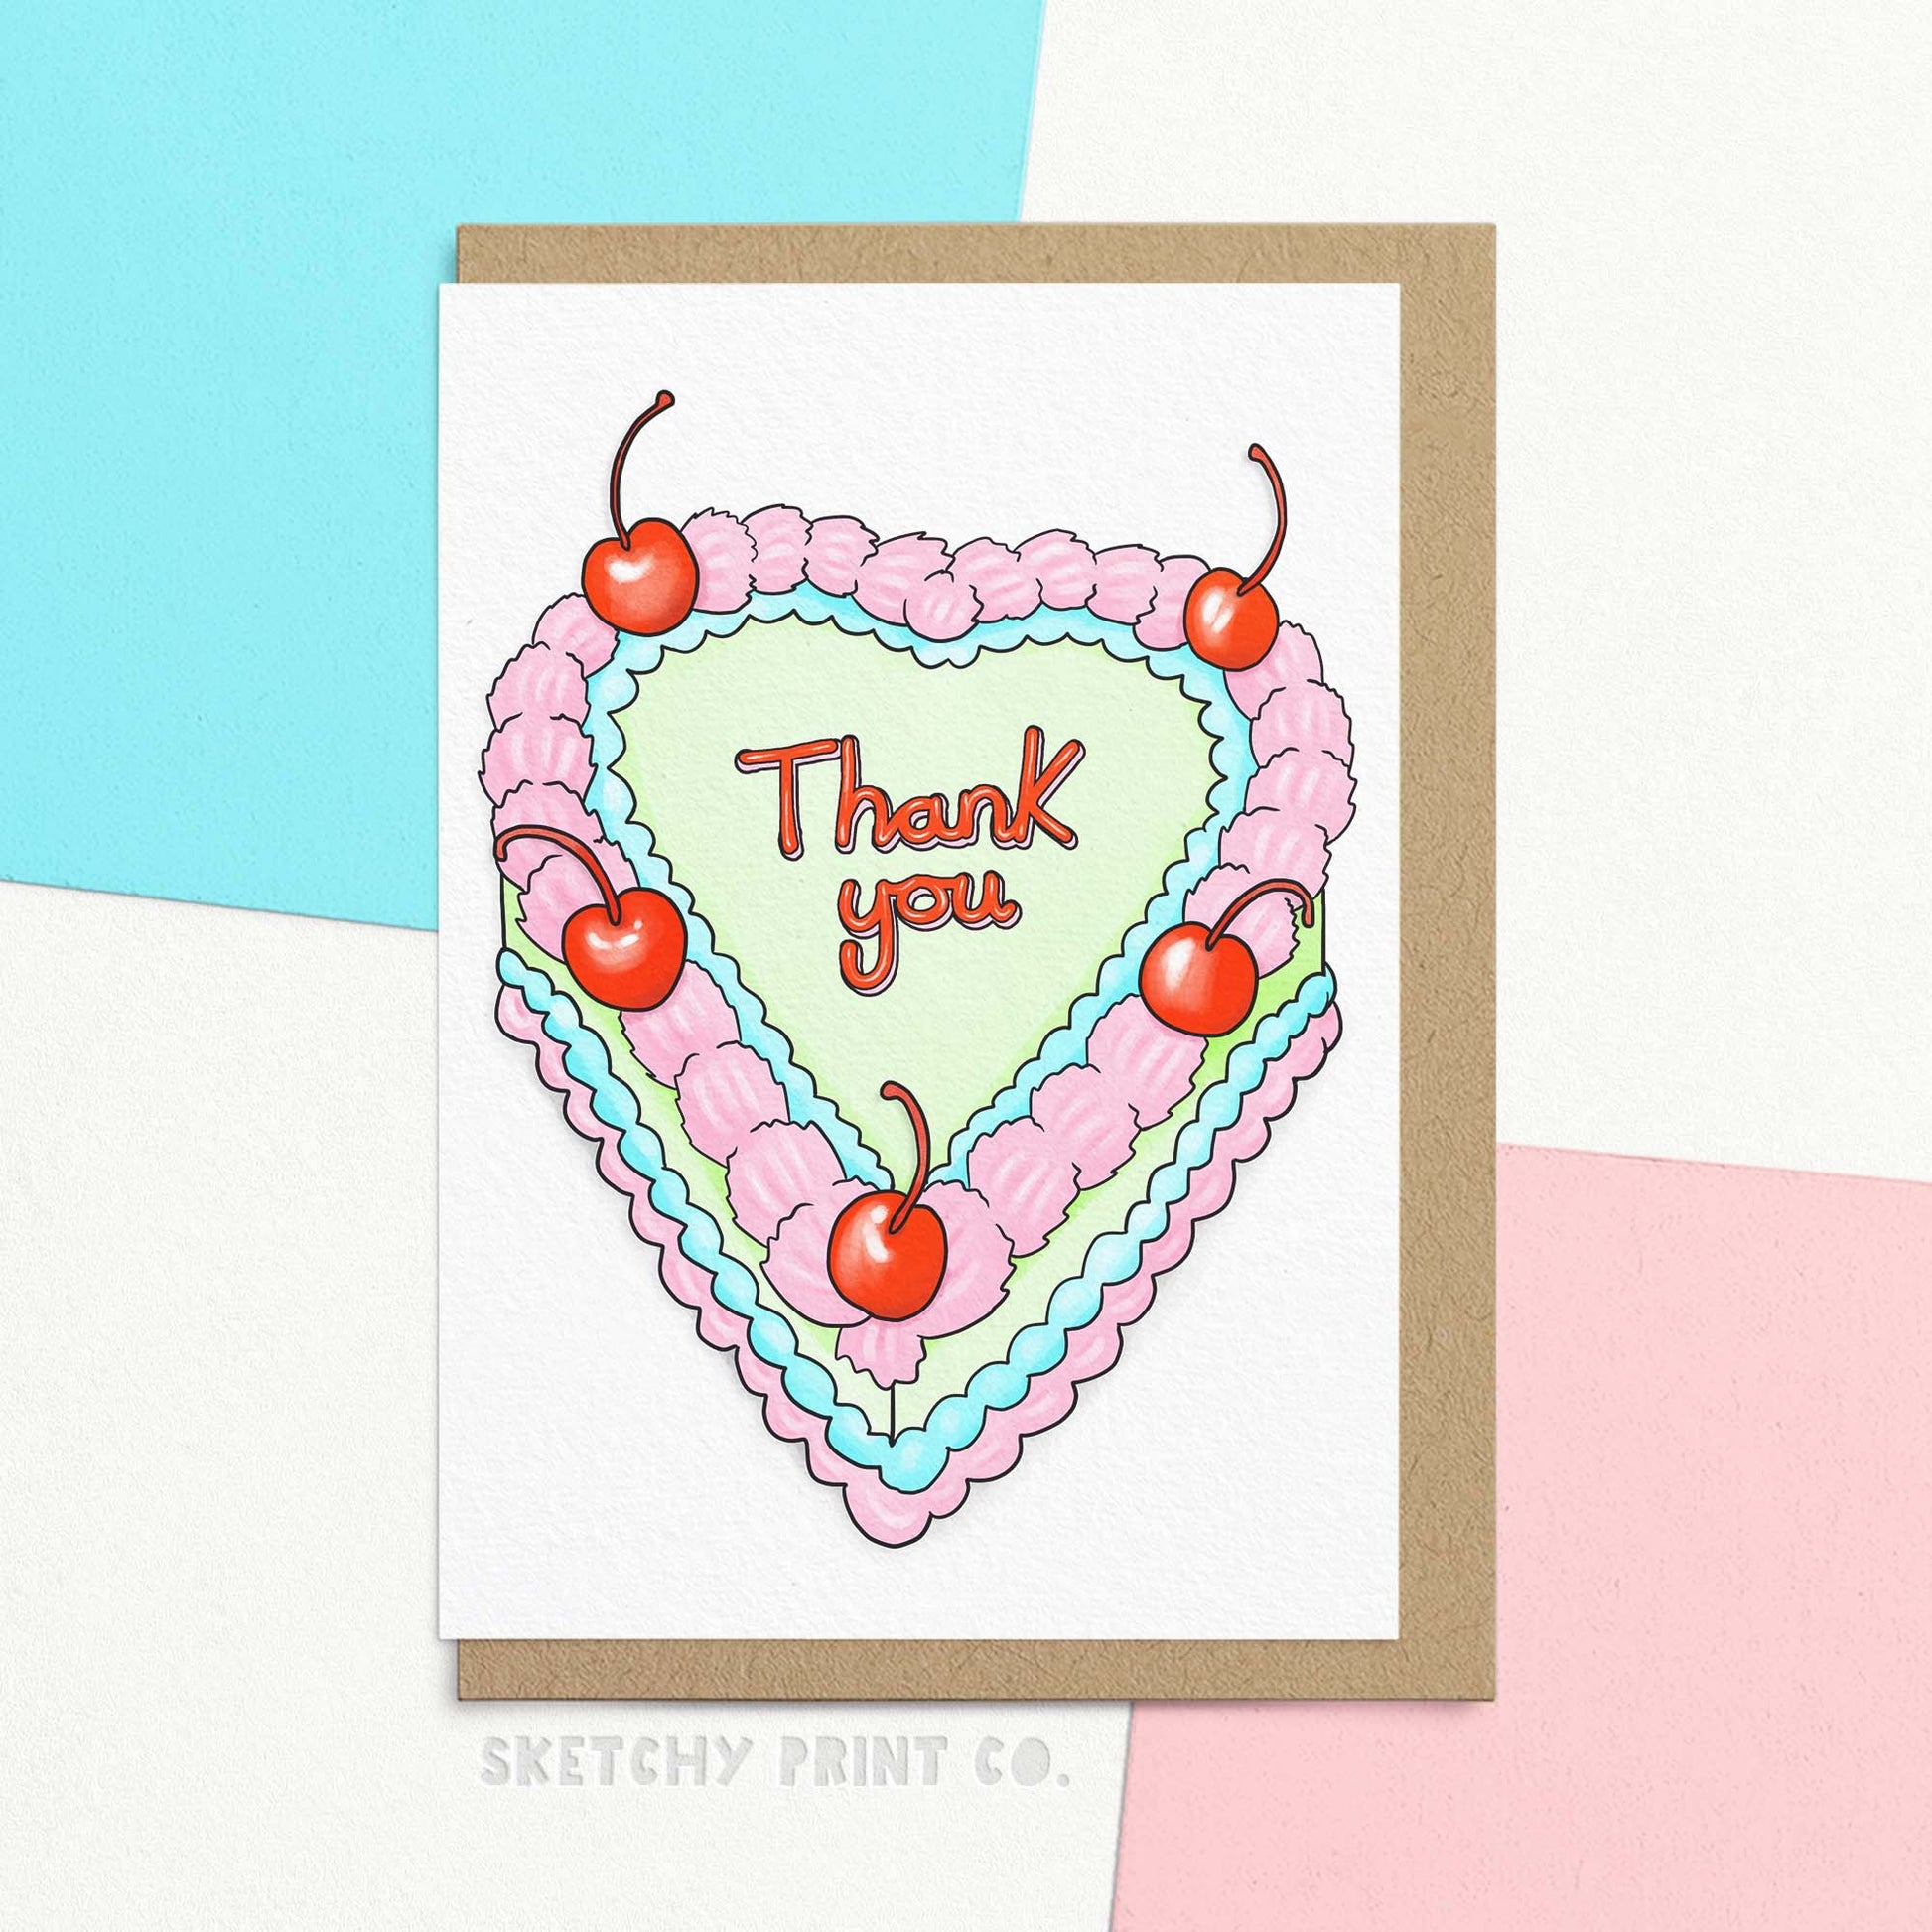 Cute thank you card featuring a watercolour illustration of a heart shaped cake with thank you written in frosting. Say thank you in the sweetest way with our Thank You Cake! Featuring funny thank yous and a cute, colourful heart-shaped design, this cake is sure to bring smiles and share gratitude. Perfect for any occasion, show your appreciation with a delicious twist!